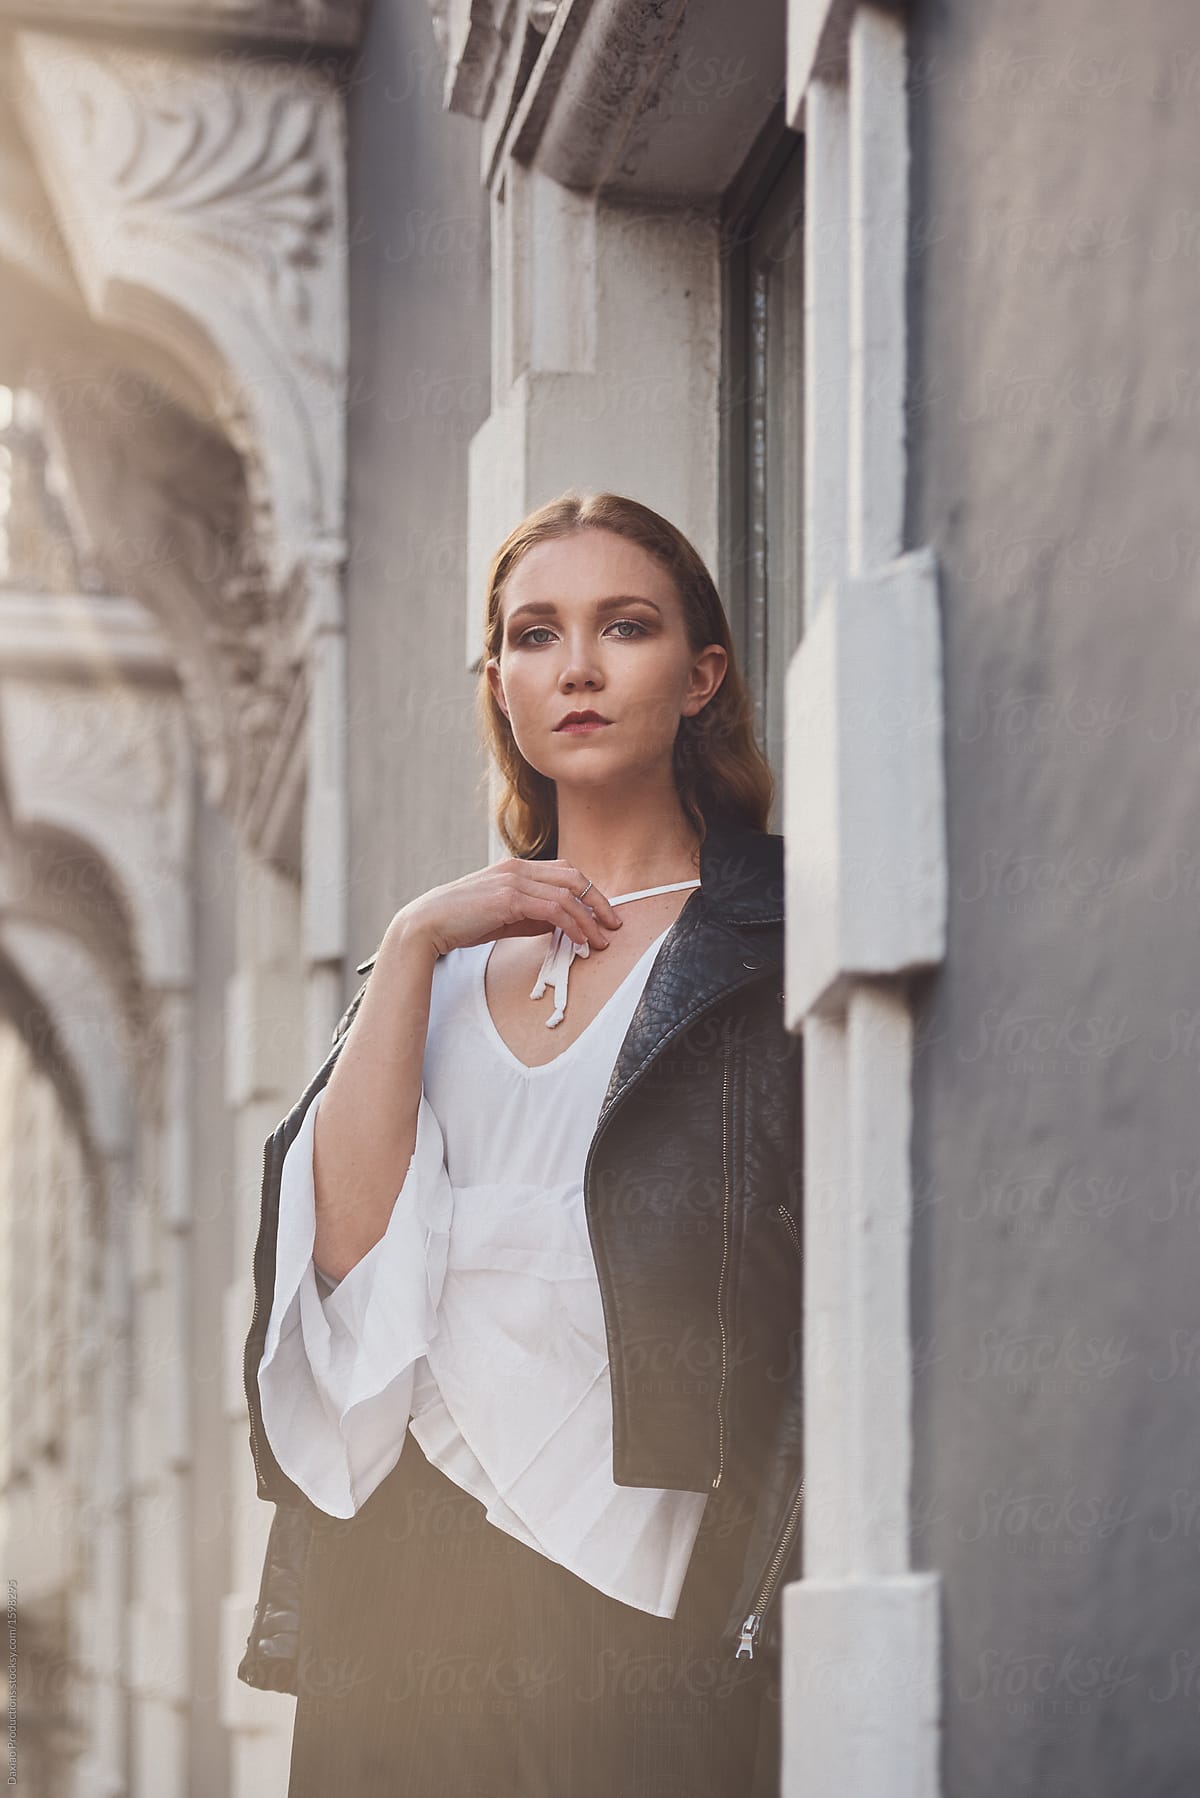 Stylish young woman portrait in european city